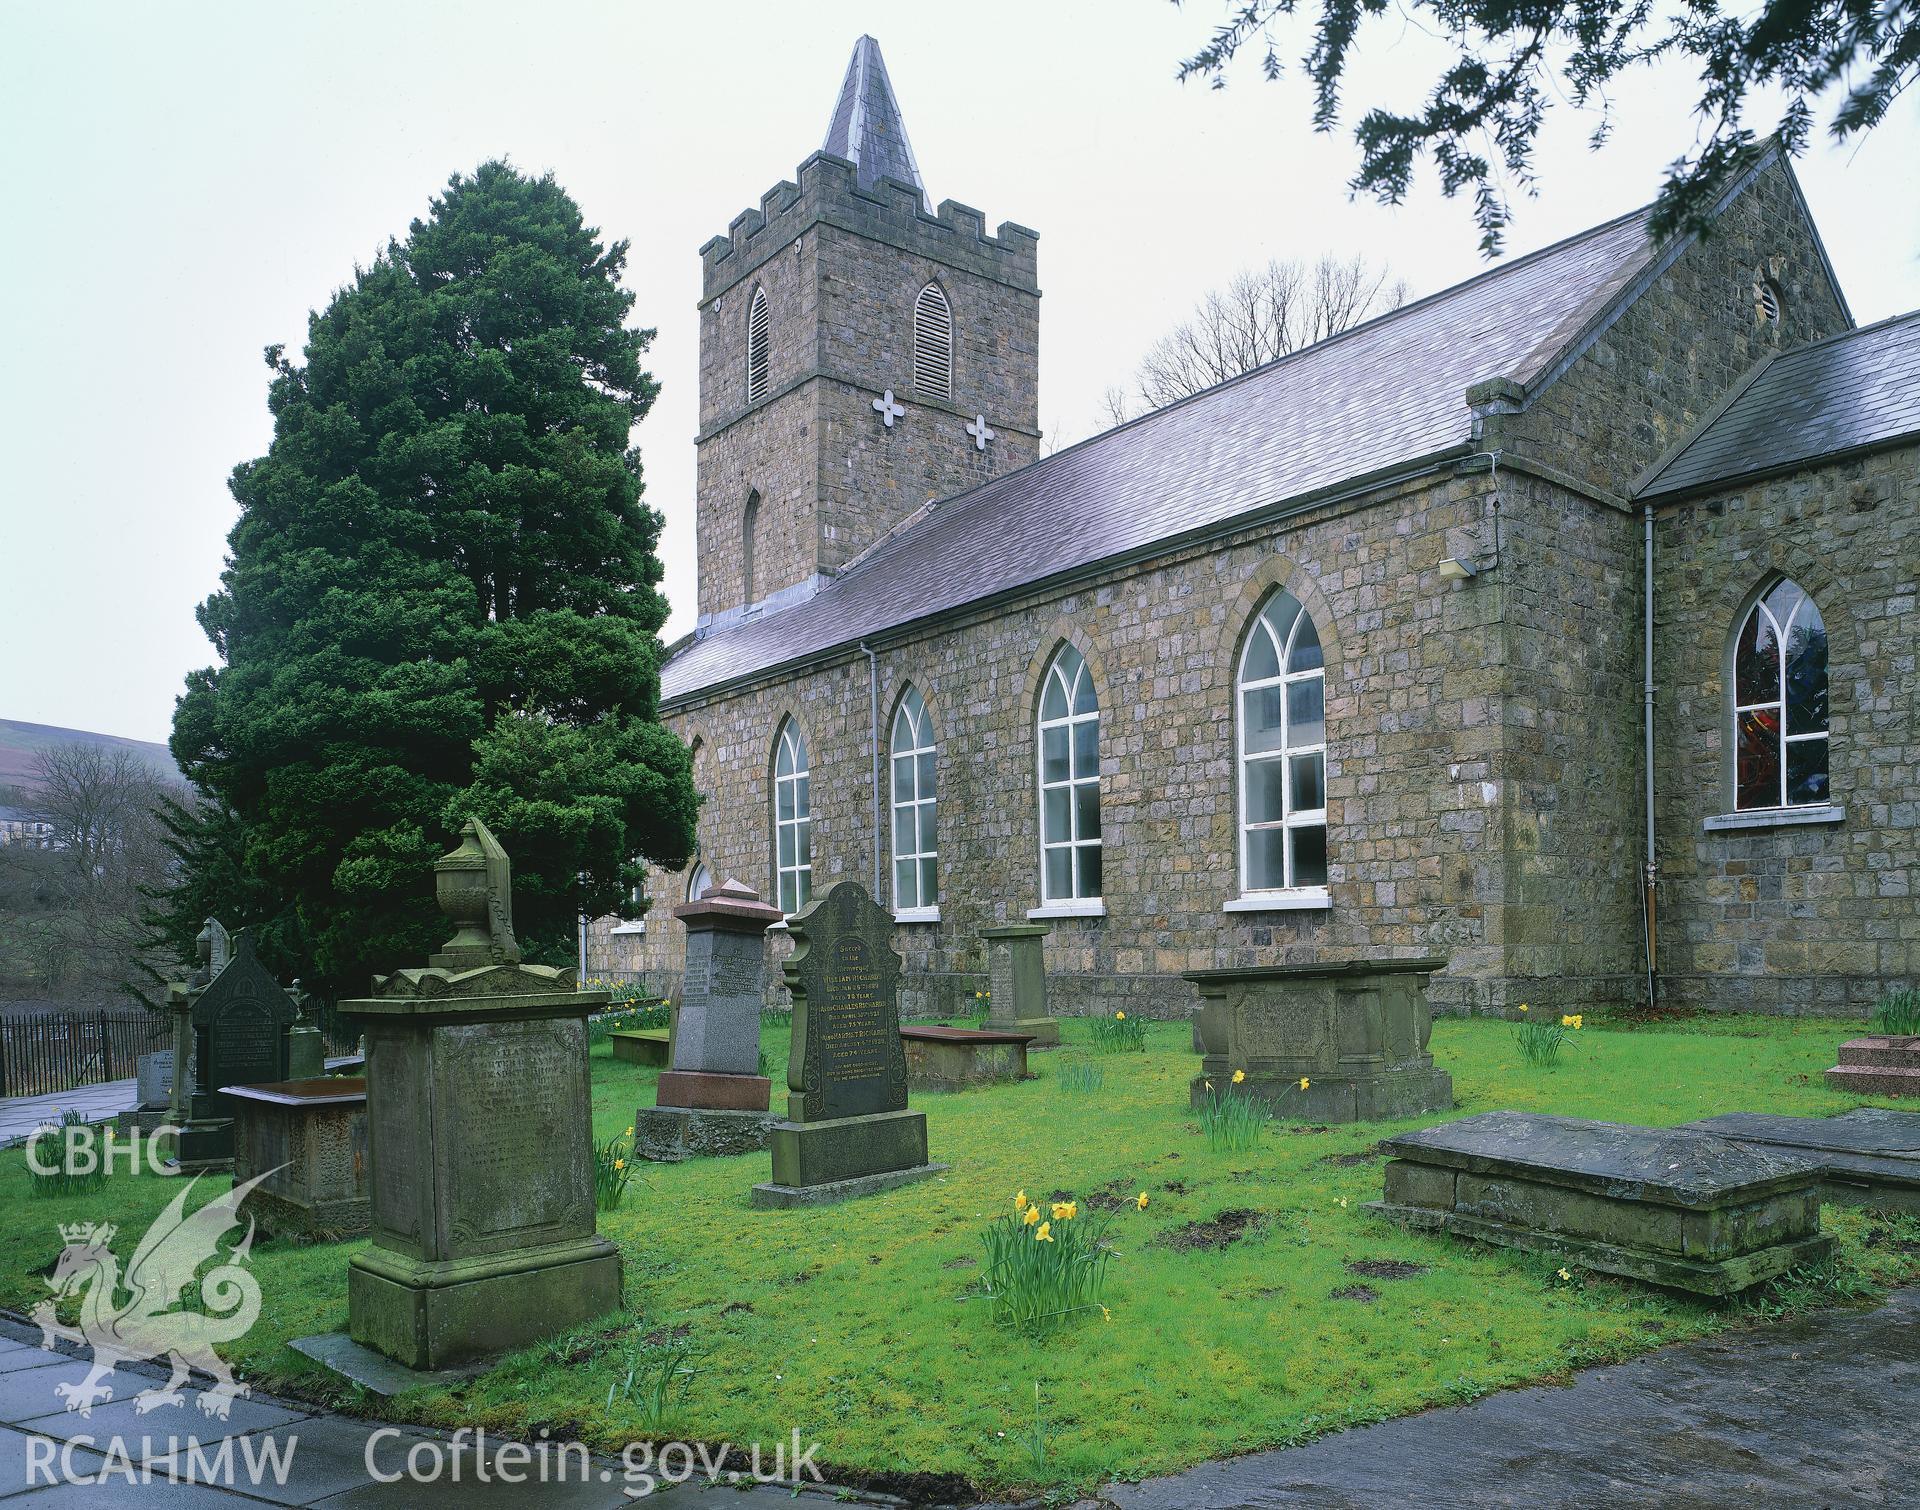 RCAHMW colour transparency showing view of St Peter's Church, Blaenavon